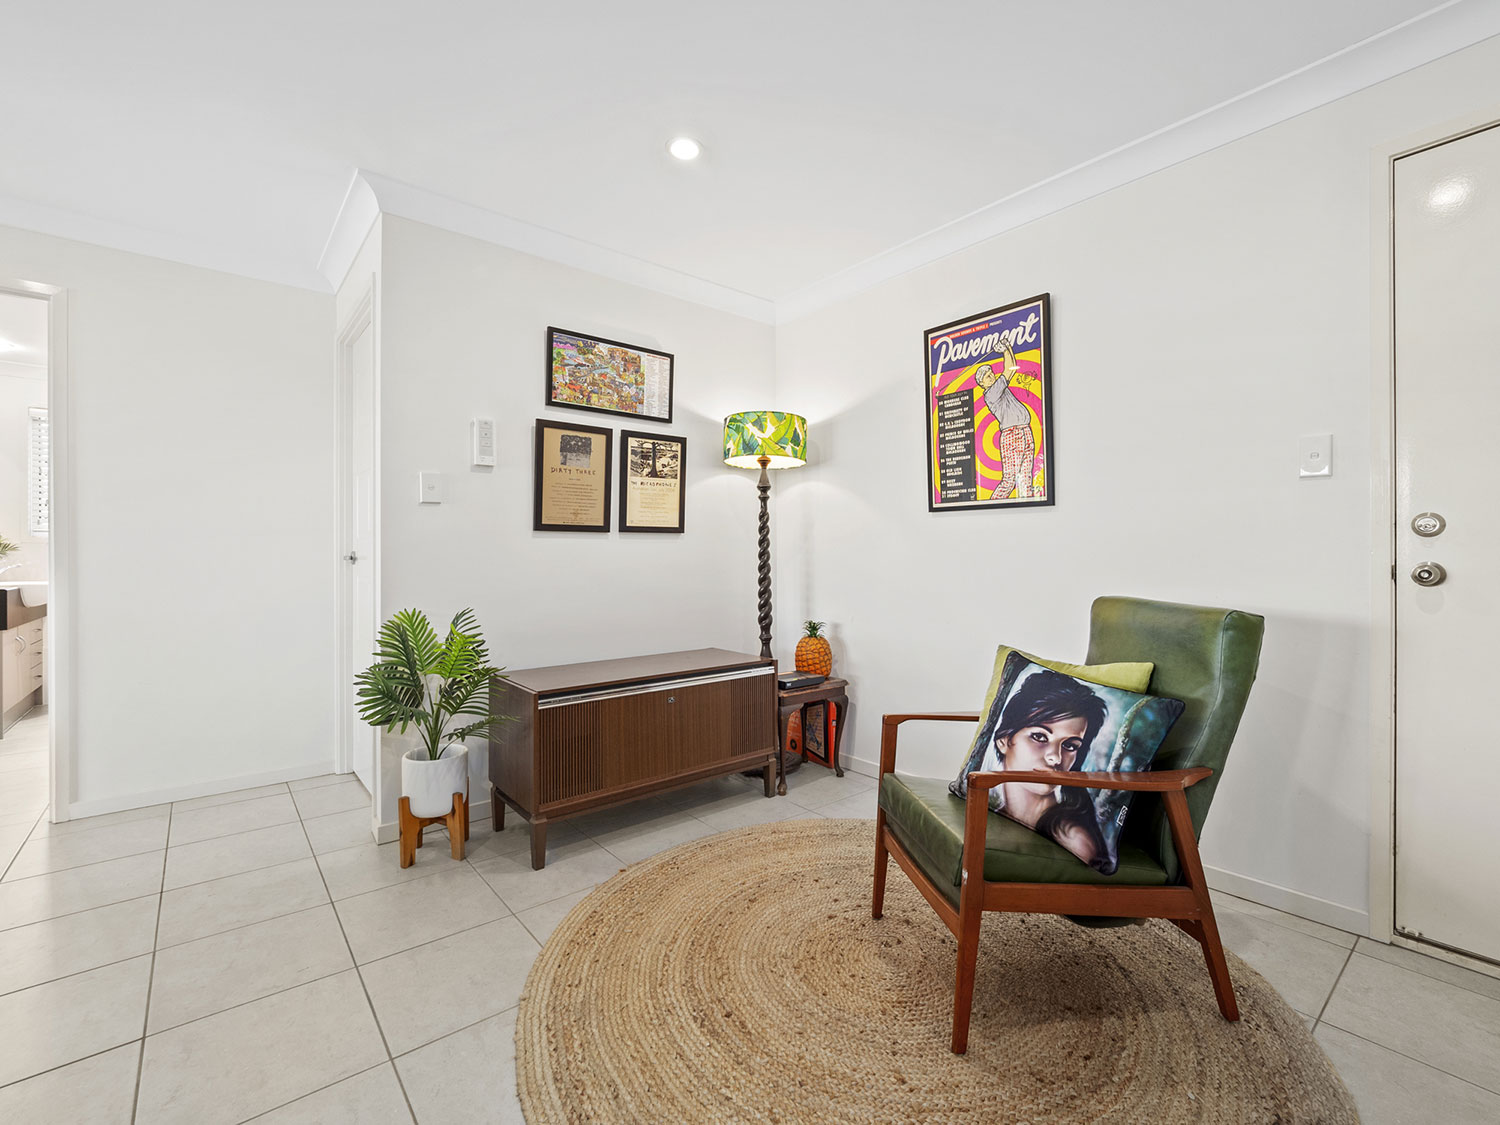 Capturing the master bedroom of the home for sale at Mitchelton